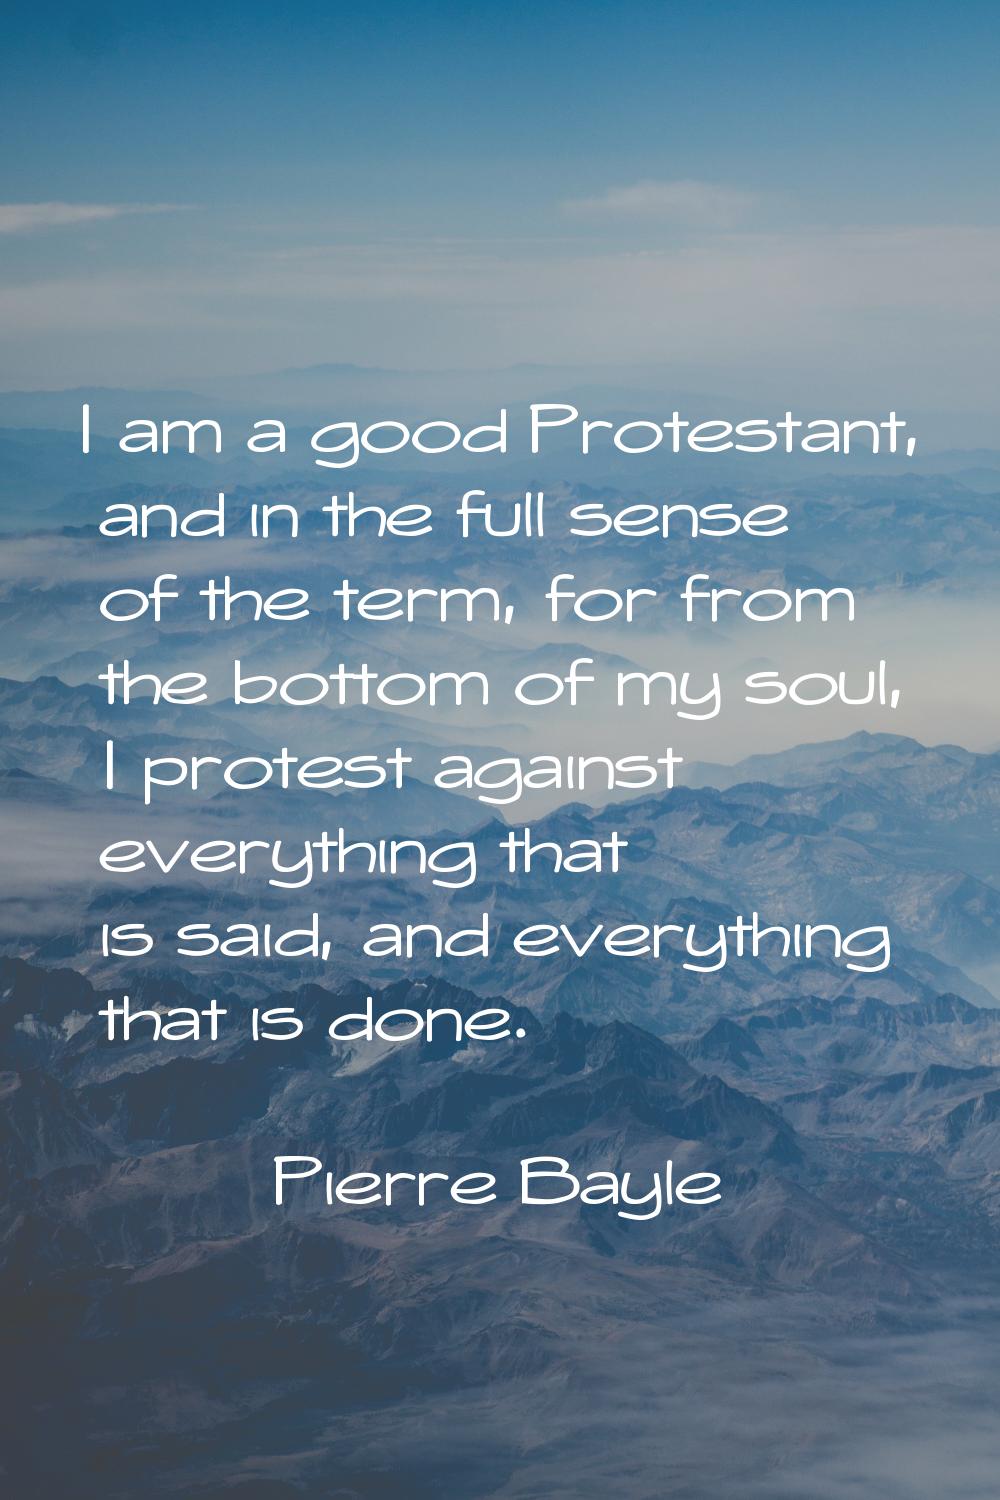 I am a good Protestant, and in the full sense of the term, for from the bottom of my soul, I protes